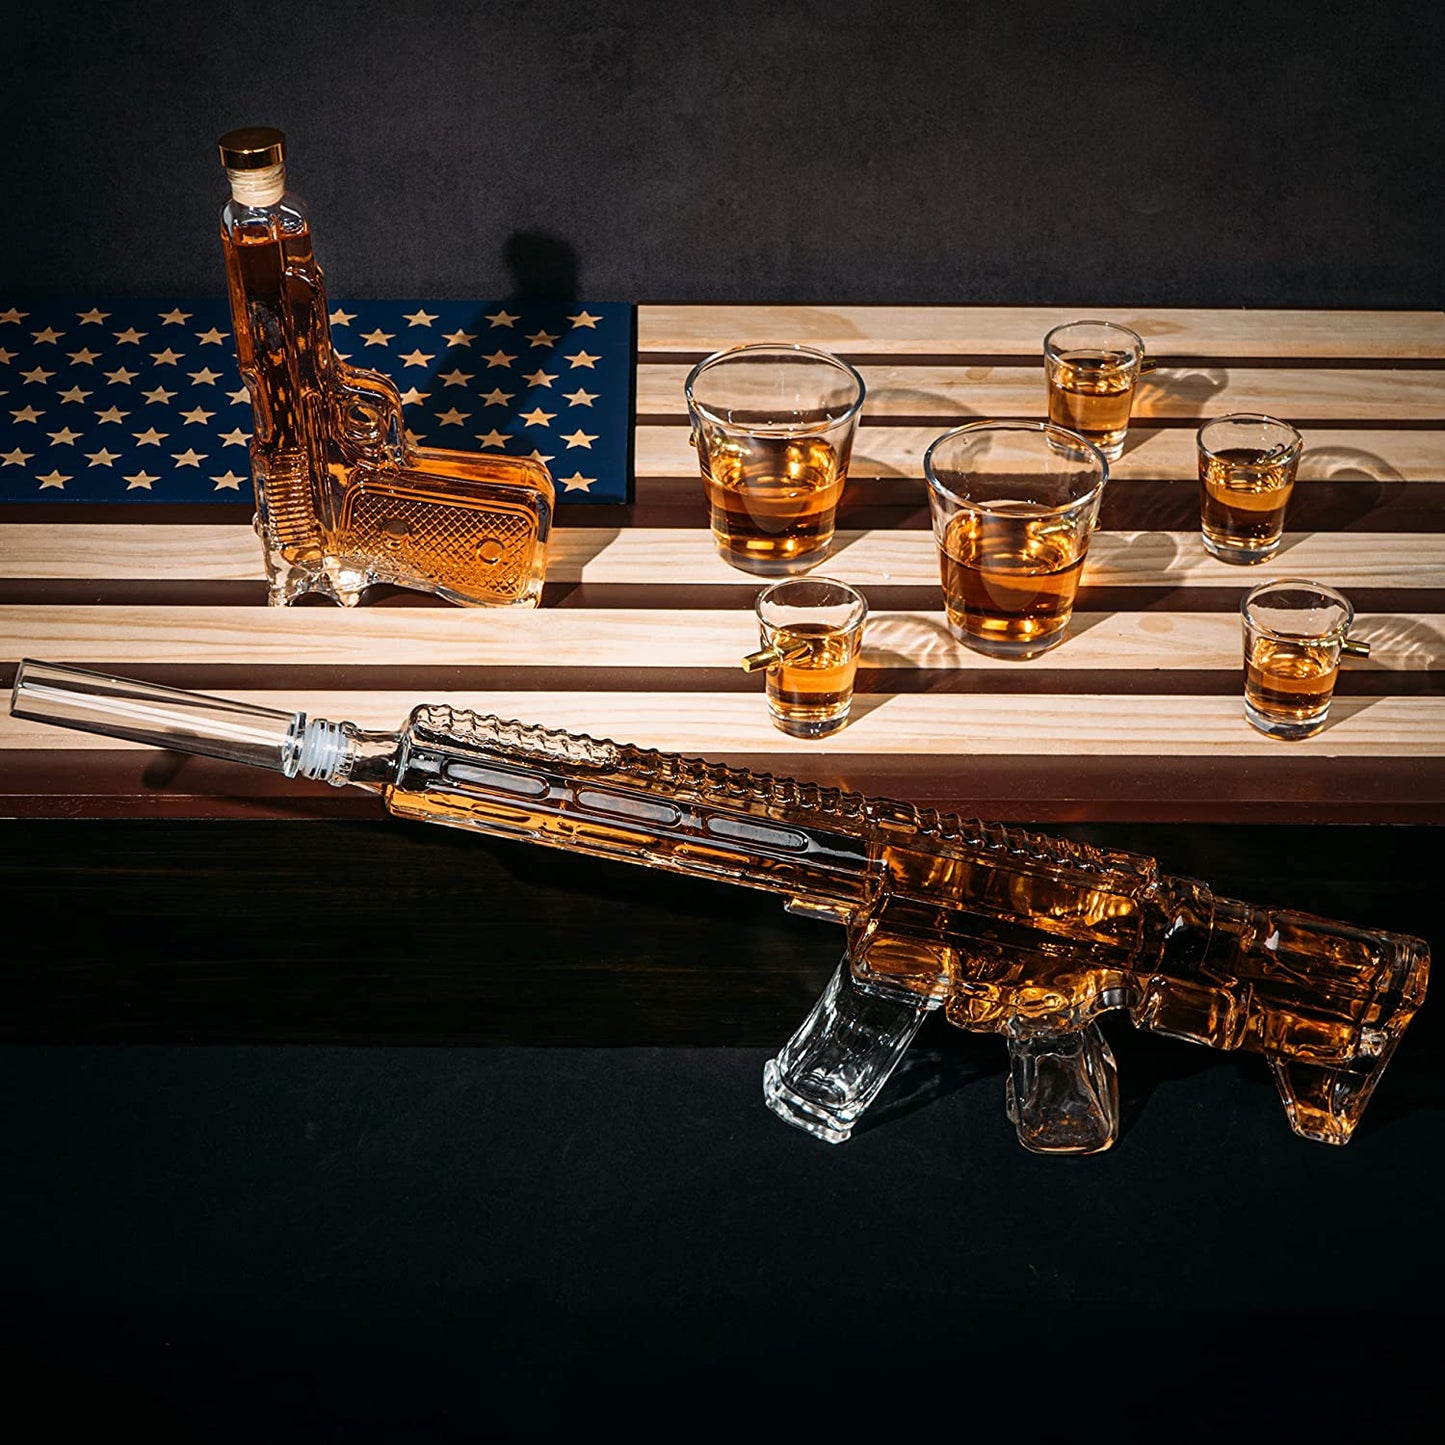 Pistol & AR15 Whiskey Decanter Set of 2 on Hidden Storage American Flag Wall Rack by The Wine Savant with 4 Bullet Shot Glasses & 2 Bullet Whiskey Glasses - Veteran Gifts, Military Gift, Home Bar Gift-4